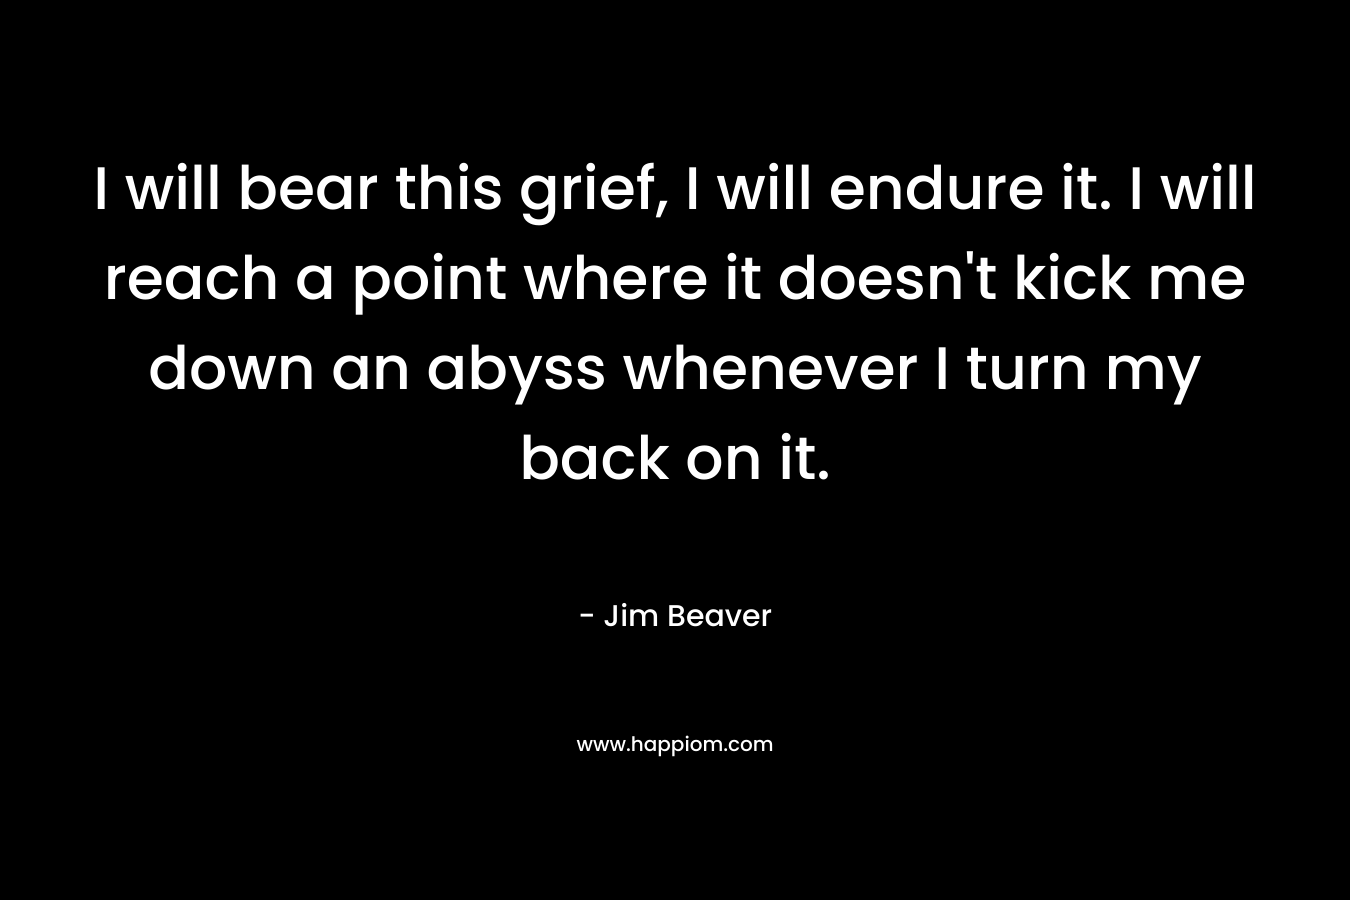 I will bear this grief, I will endure it. I will reach a point where it doesn't kick me down an abyss whenever I turn my back on it.